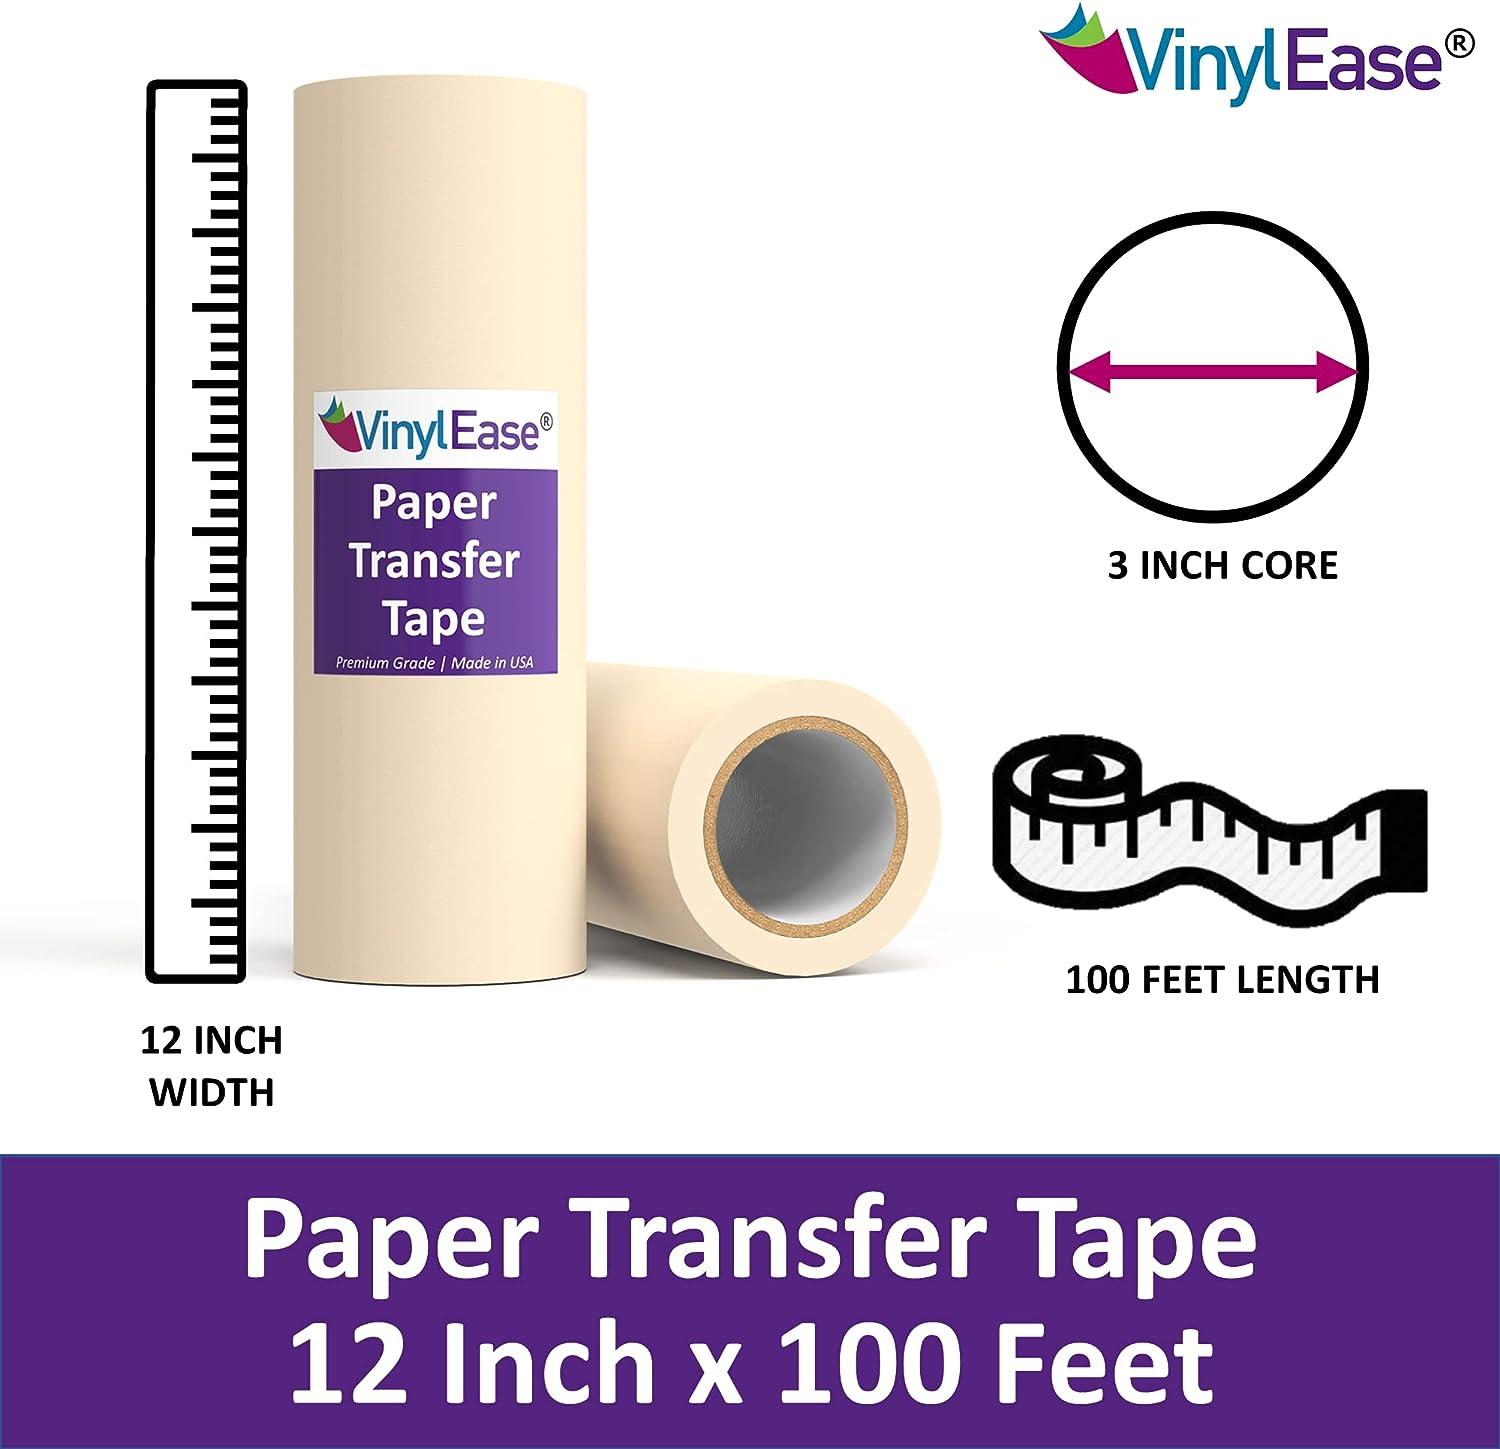 Vinyl Ease 12inch x 100 Feet Roll of Paper Transfer Tape with A Medium to High Tack Layflat Adhesive. Works with A Variety of Vinyl. Great for Decals